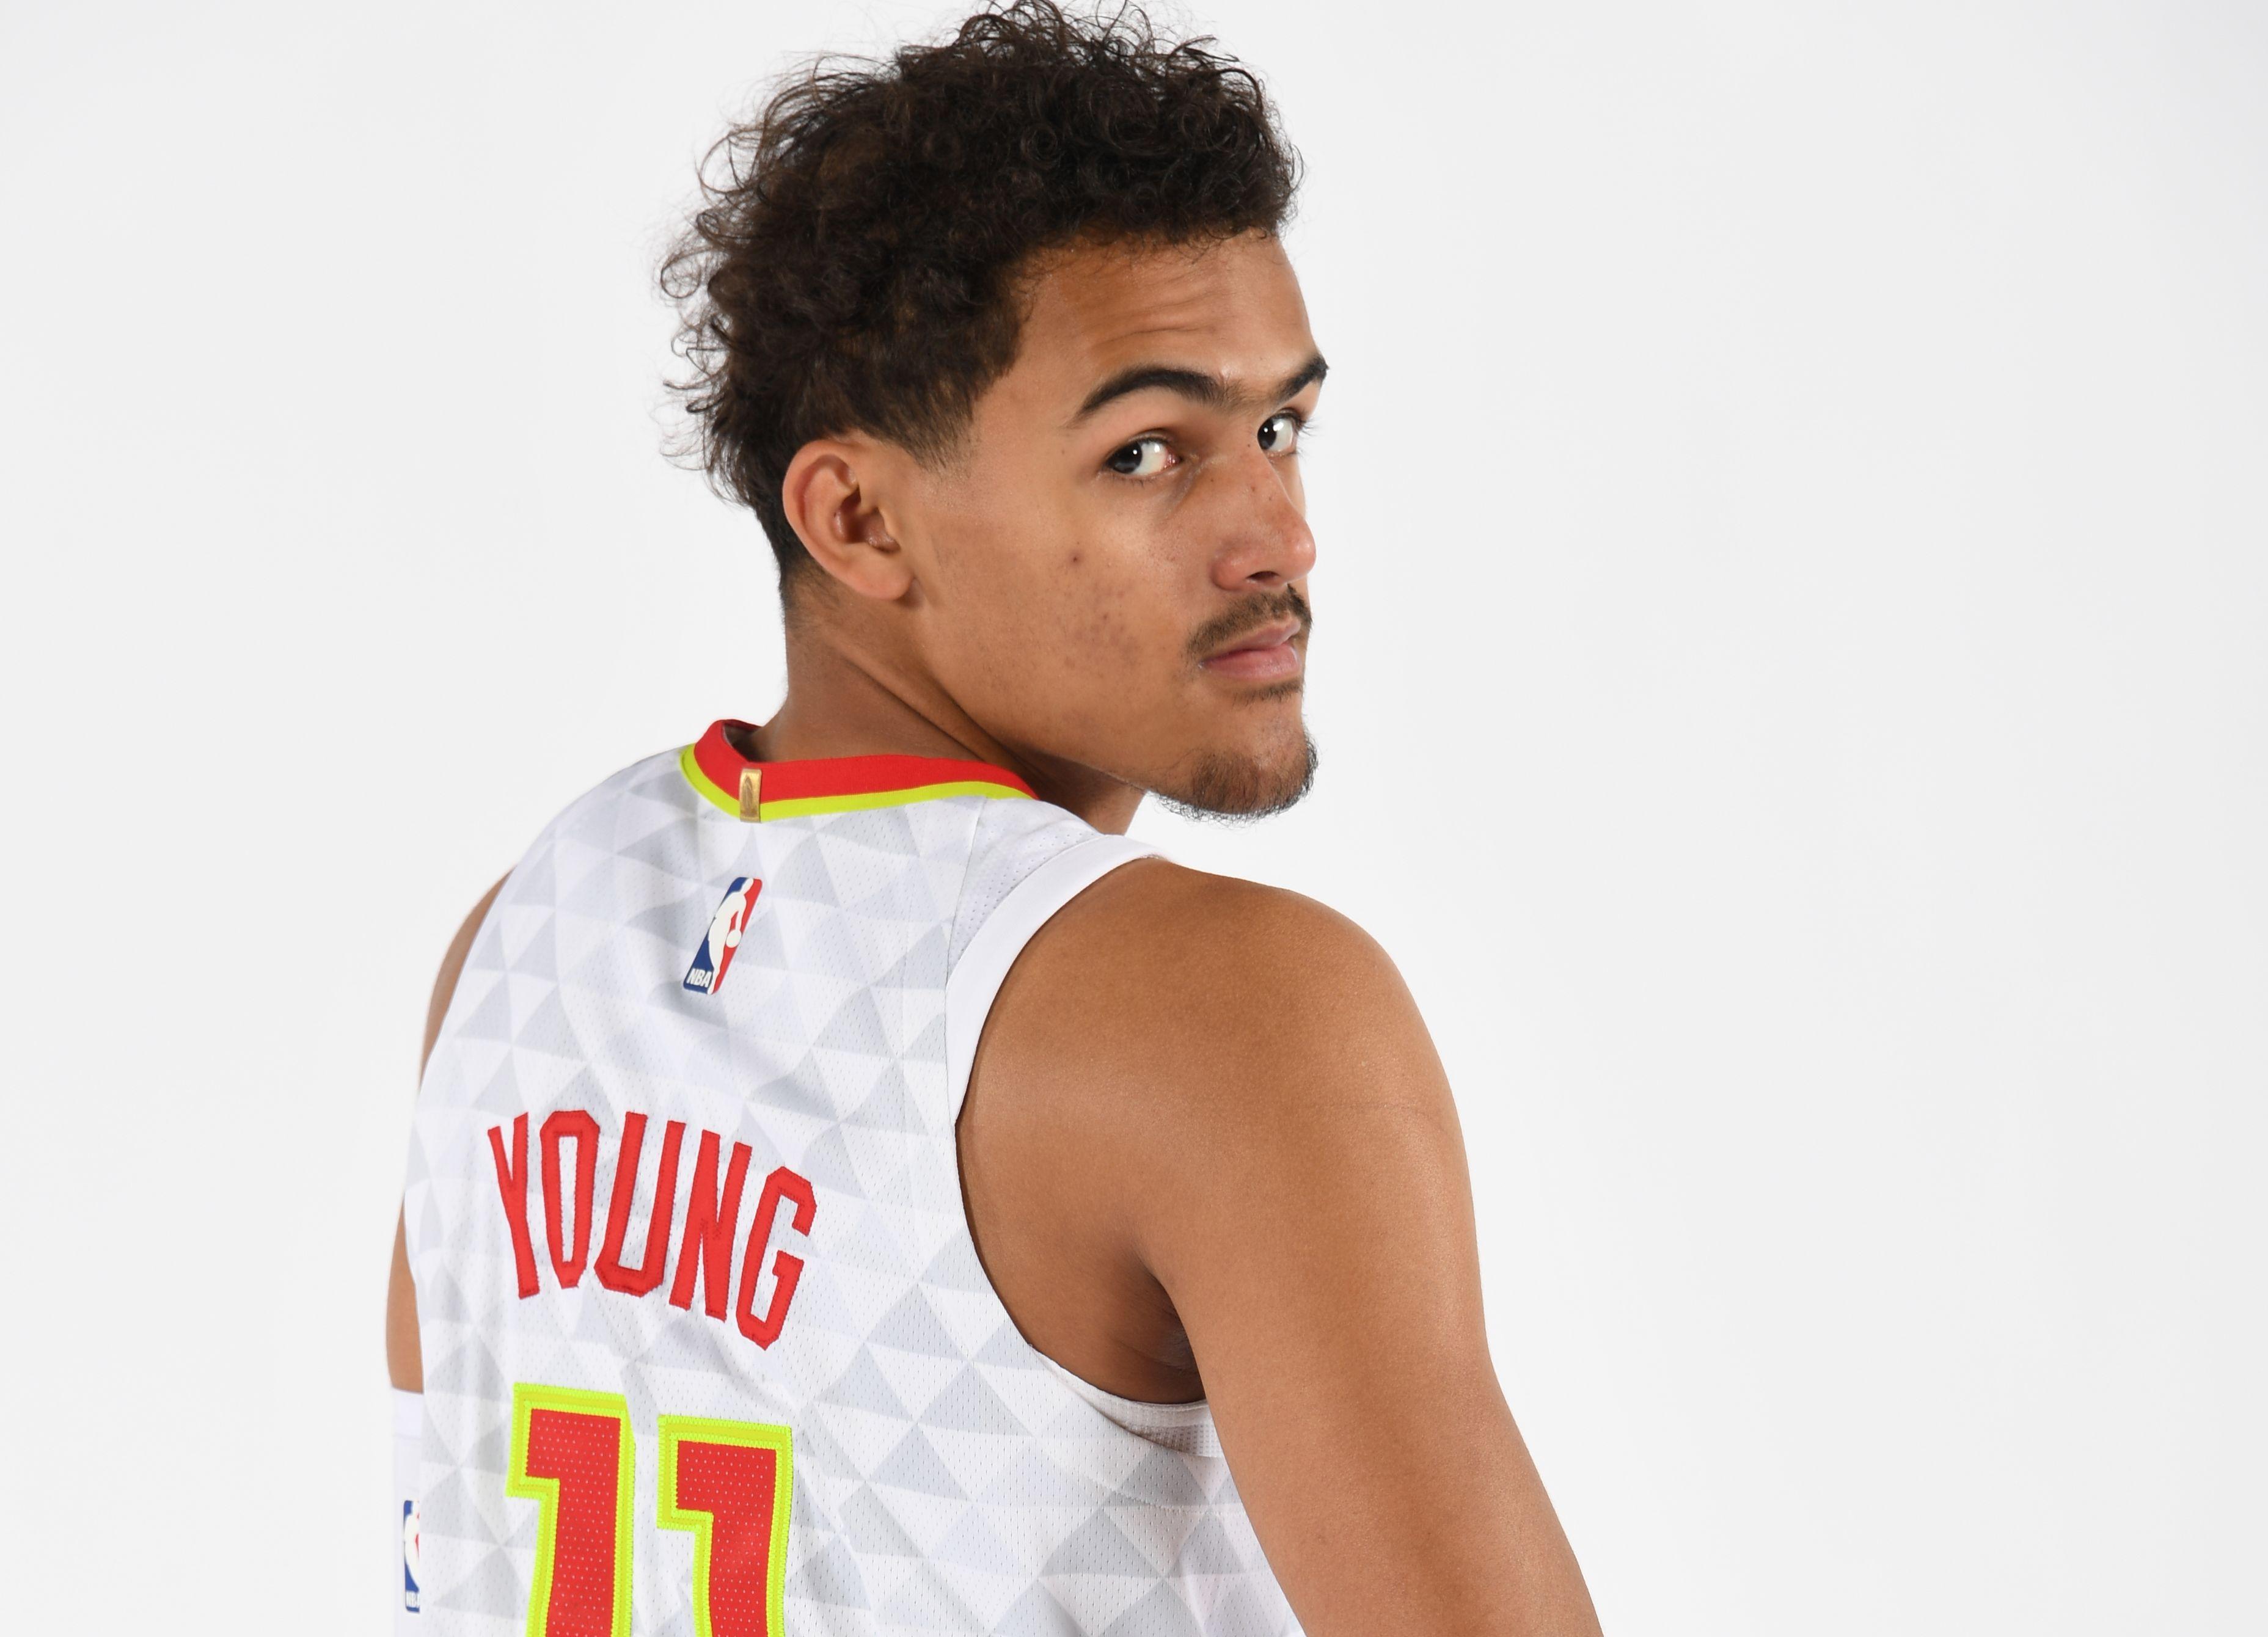 Trae Young Gets Candid During Presser